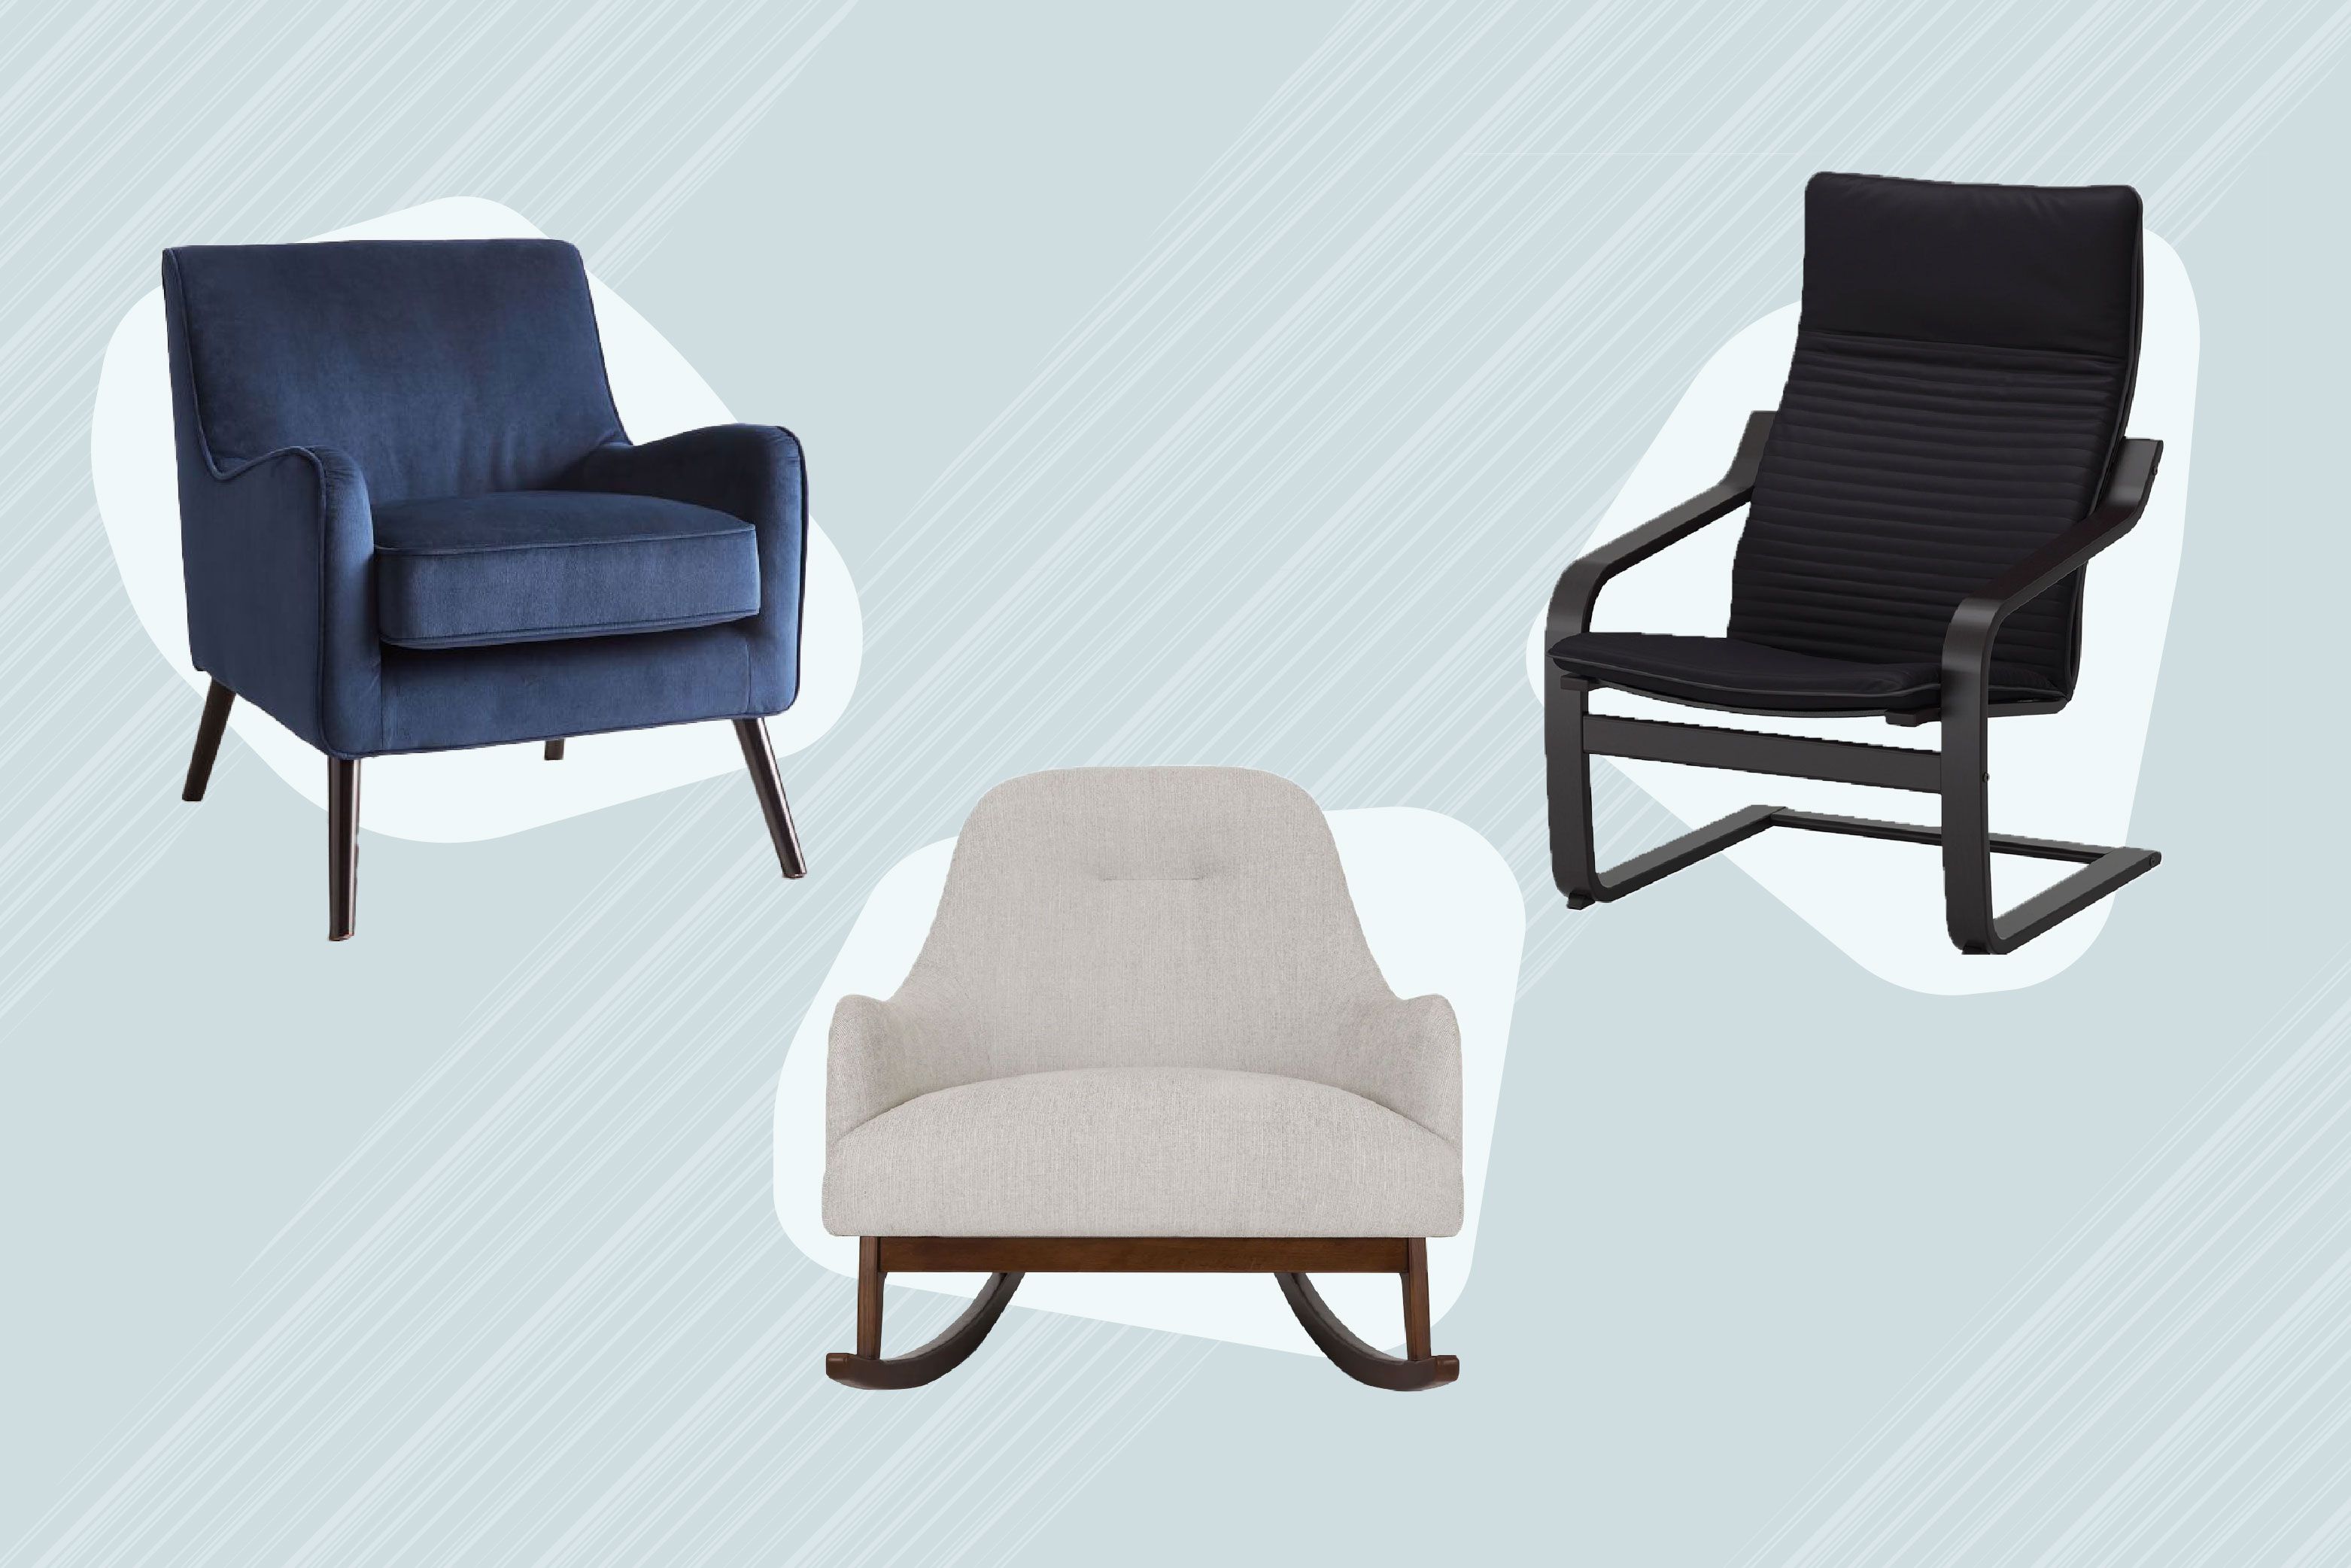 Get Comfy With Our Favorite Reading Chairs